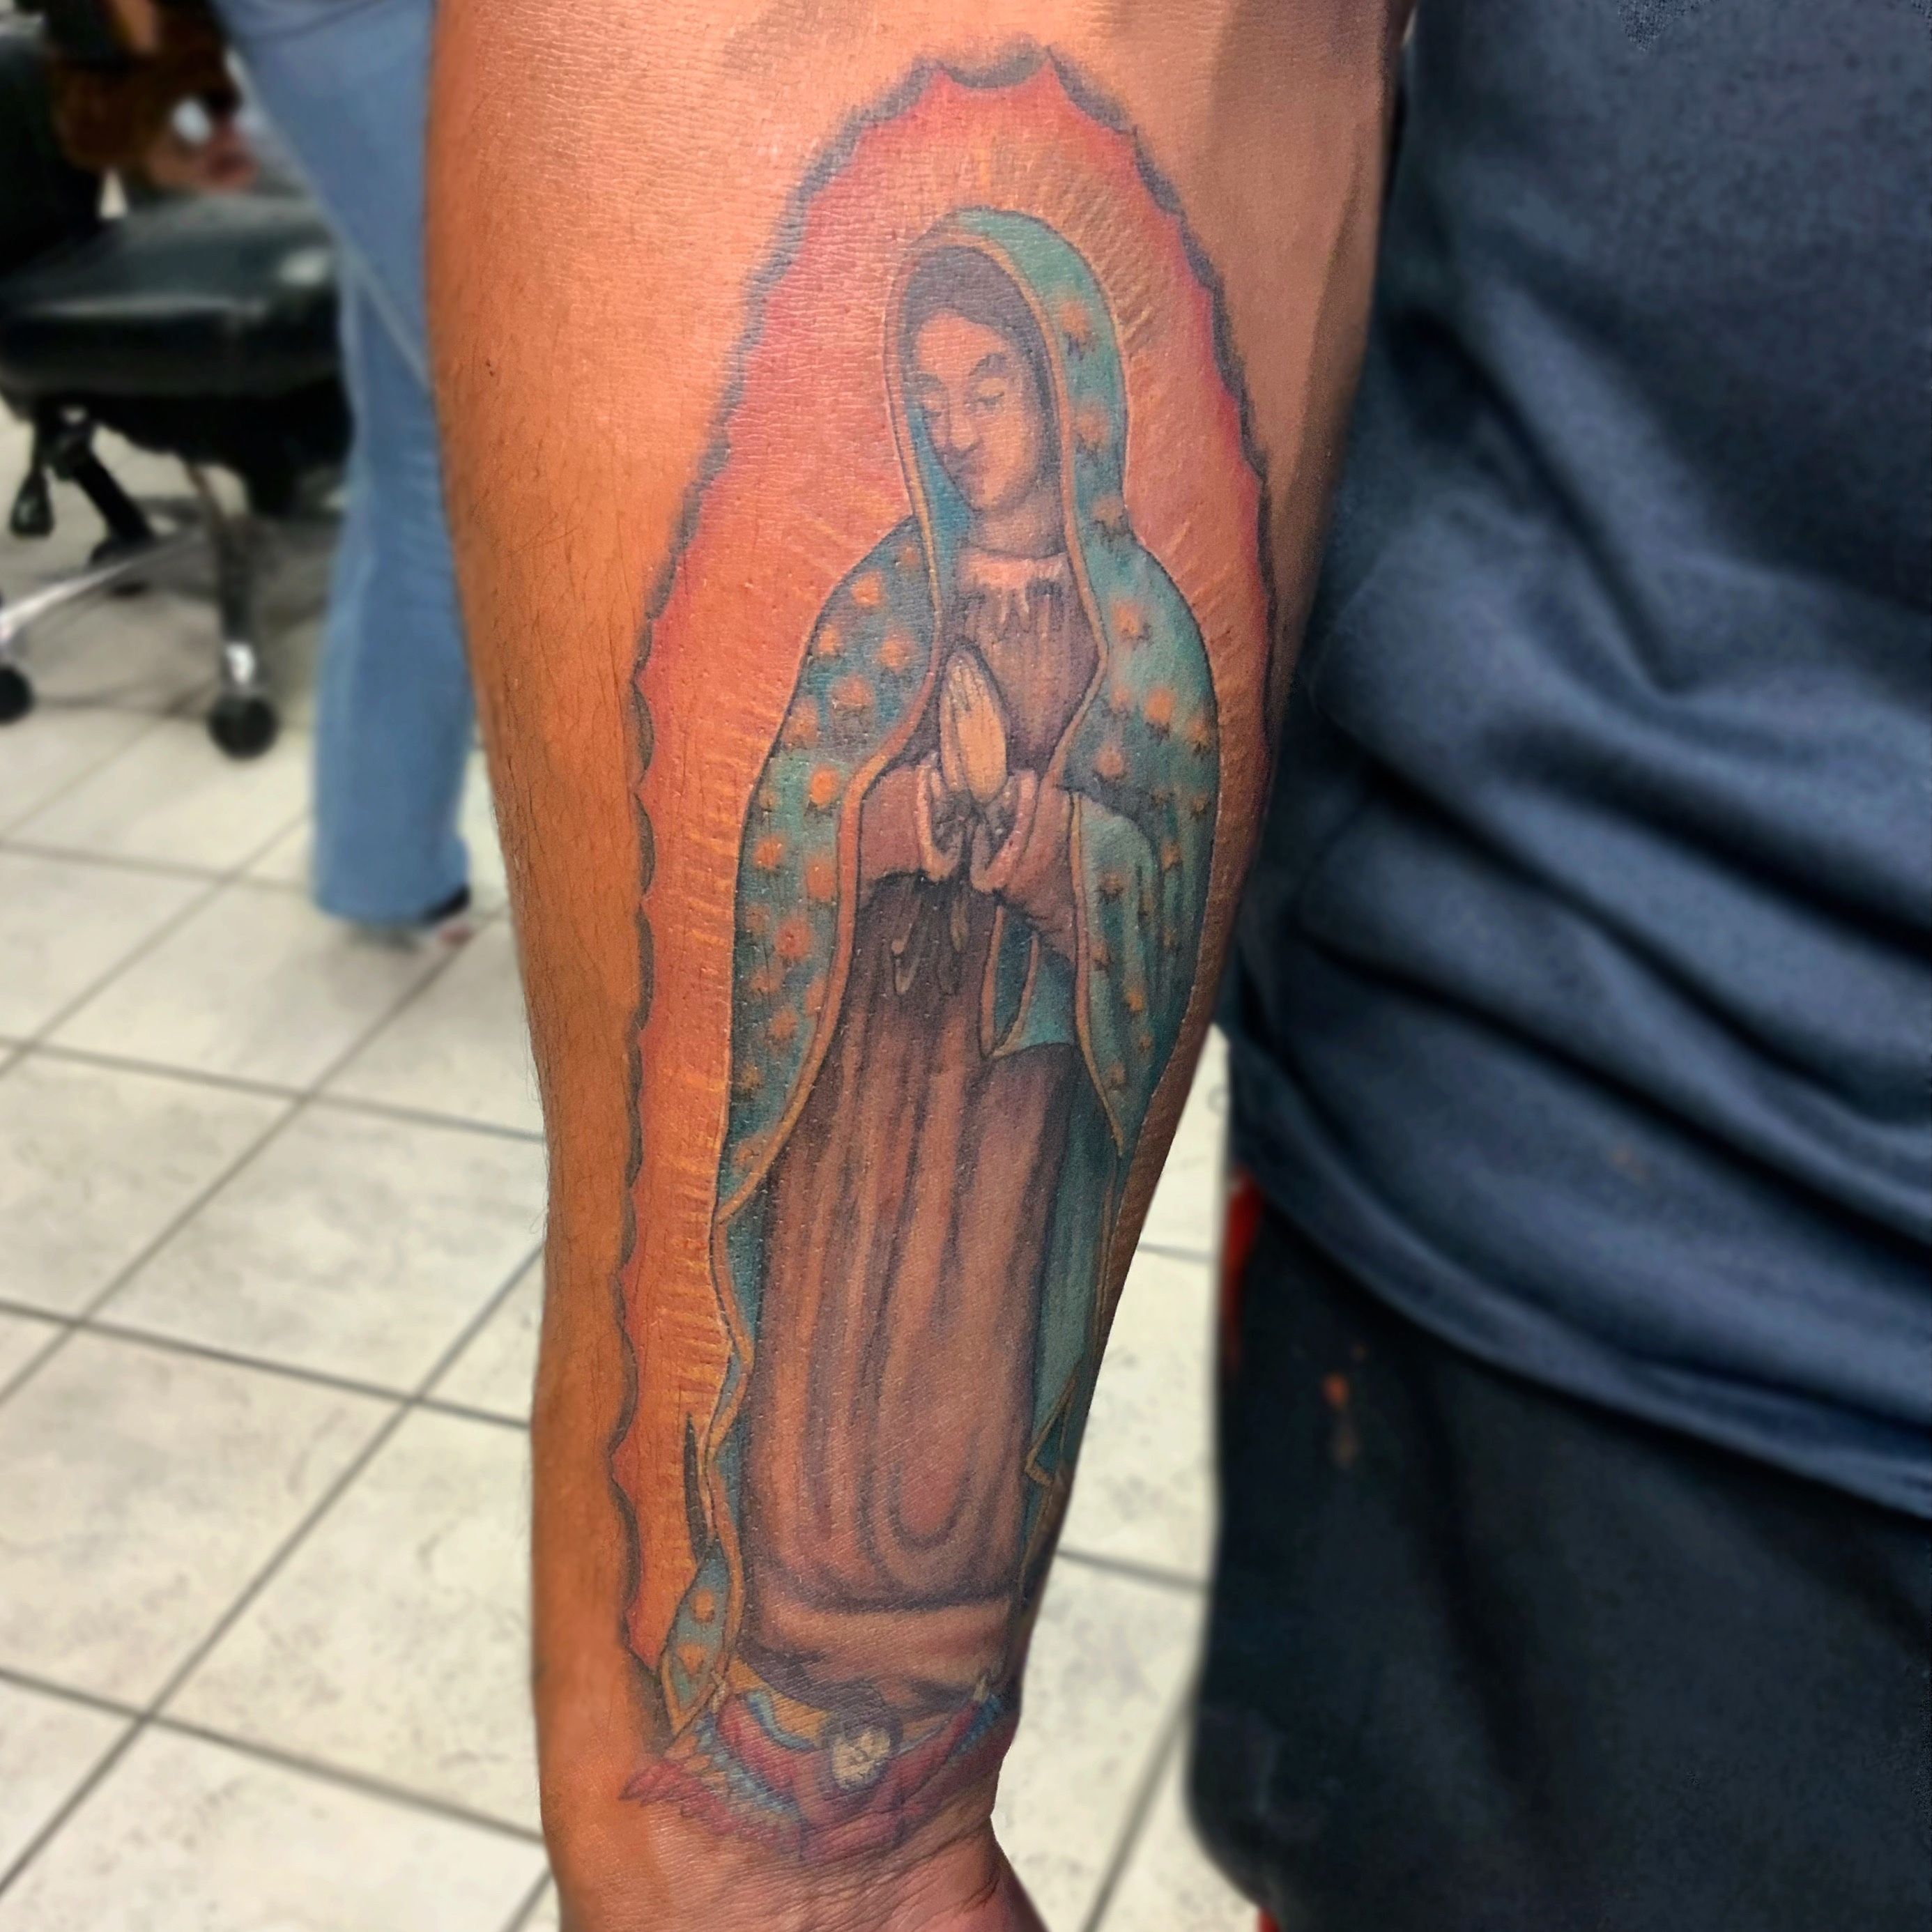 Kokopelli Ink Tattoo on Instagram Check out the details on this pretty small  Virgin Mary tattoo done by nicknacksty  kokopelliink southgate  tweedyblvd virginmary